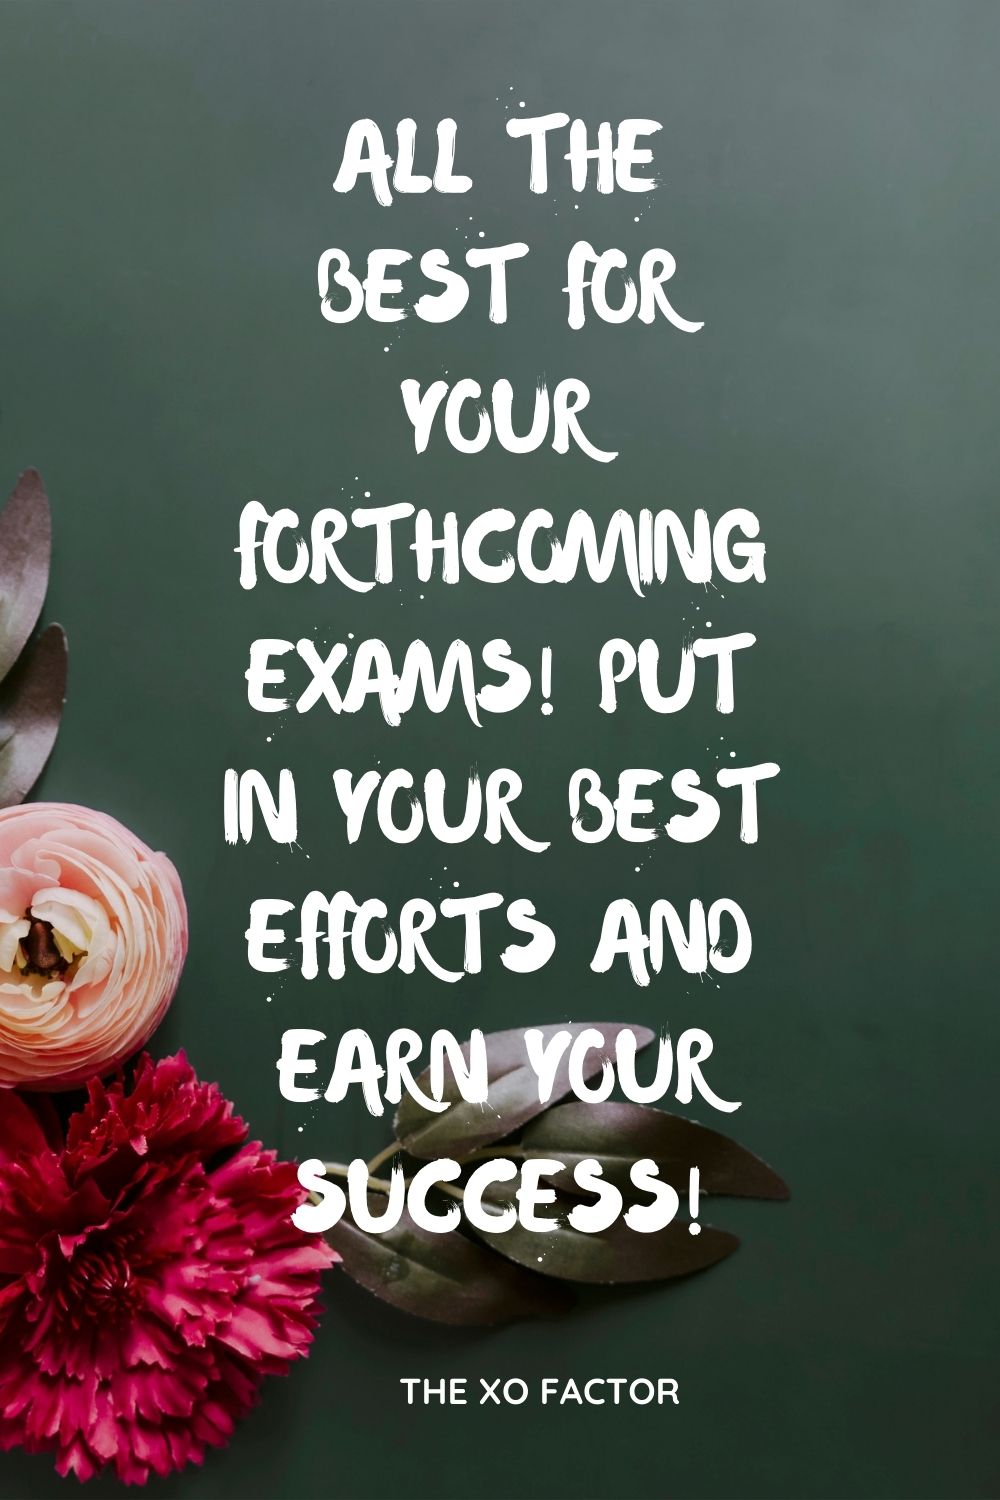 All the best for your forthcoming exams! Put in your best efforts and earn your success!